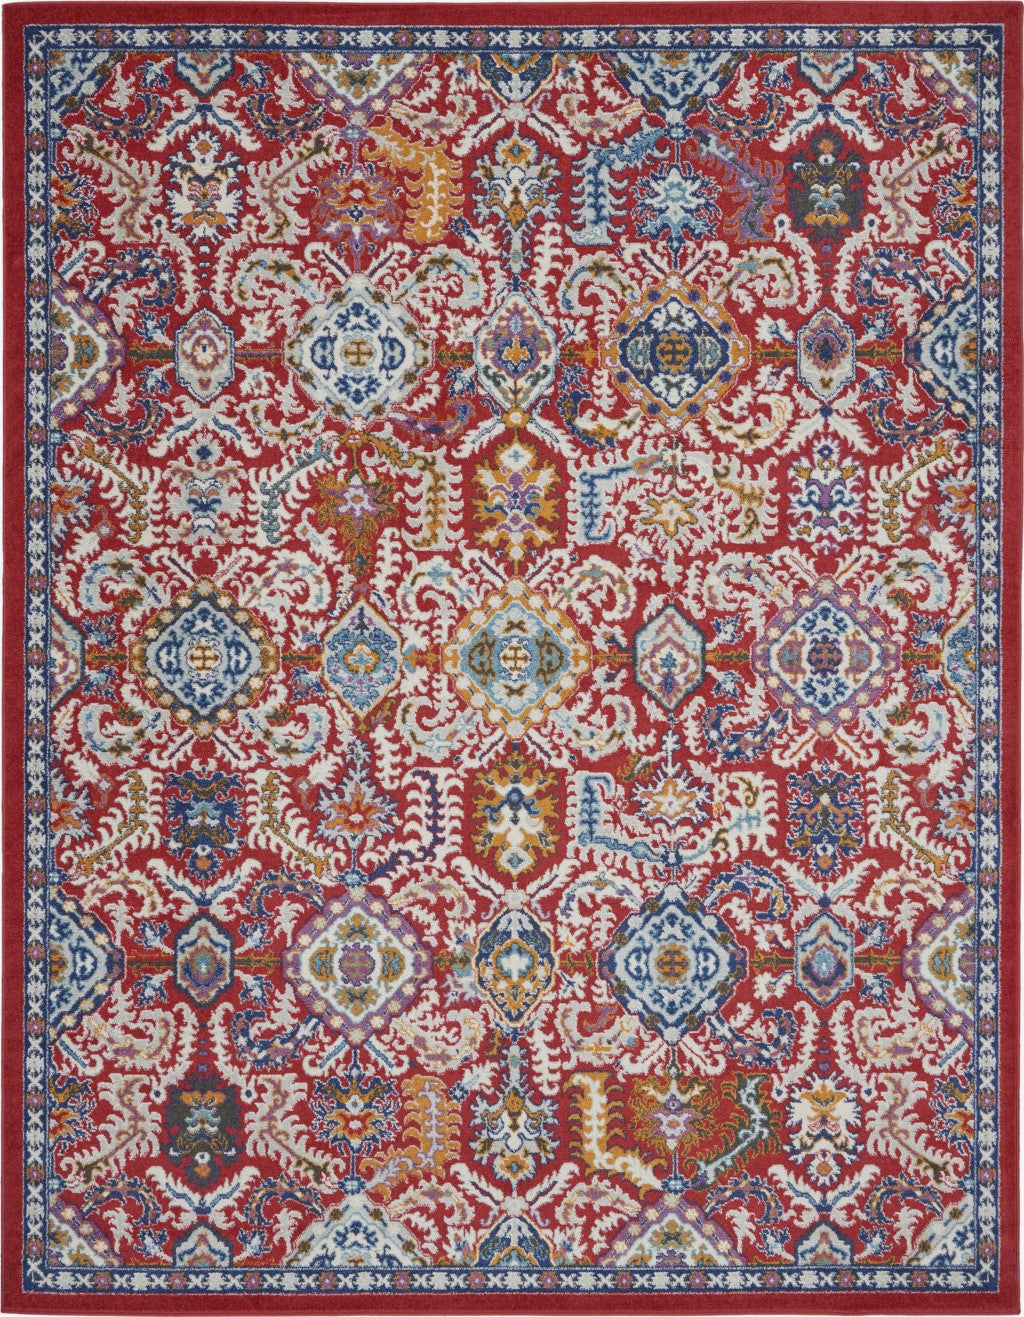 2’ X 3’ Red And Multicolor Decorative Scatter Rug